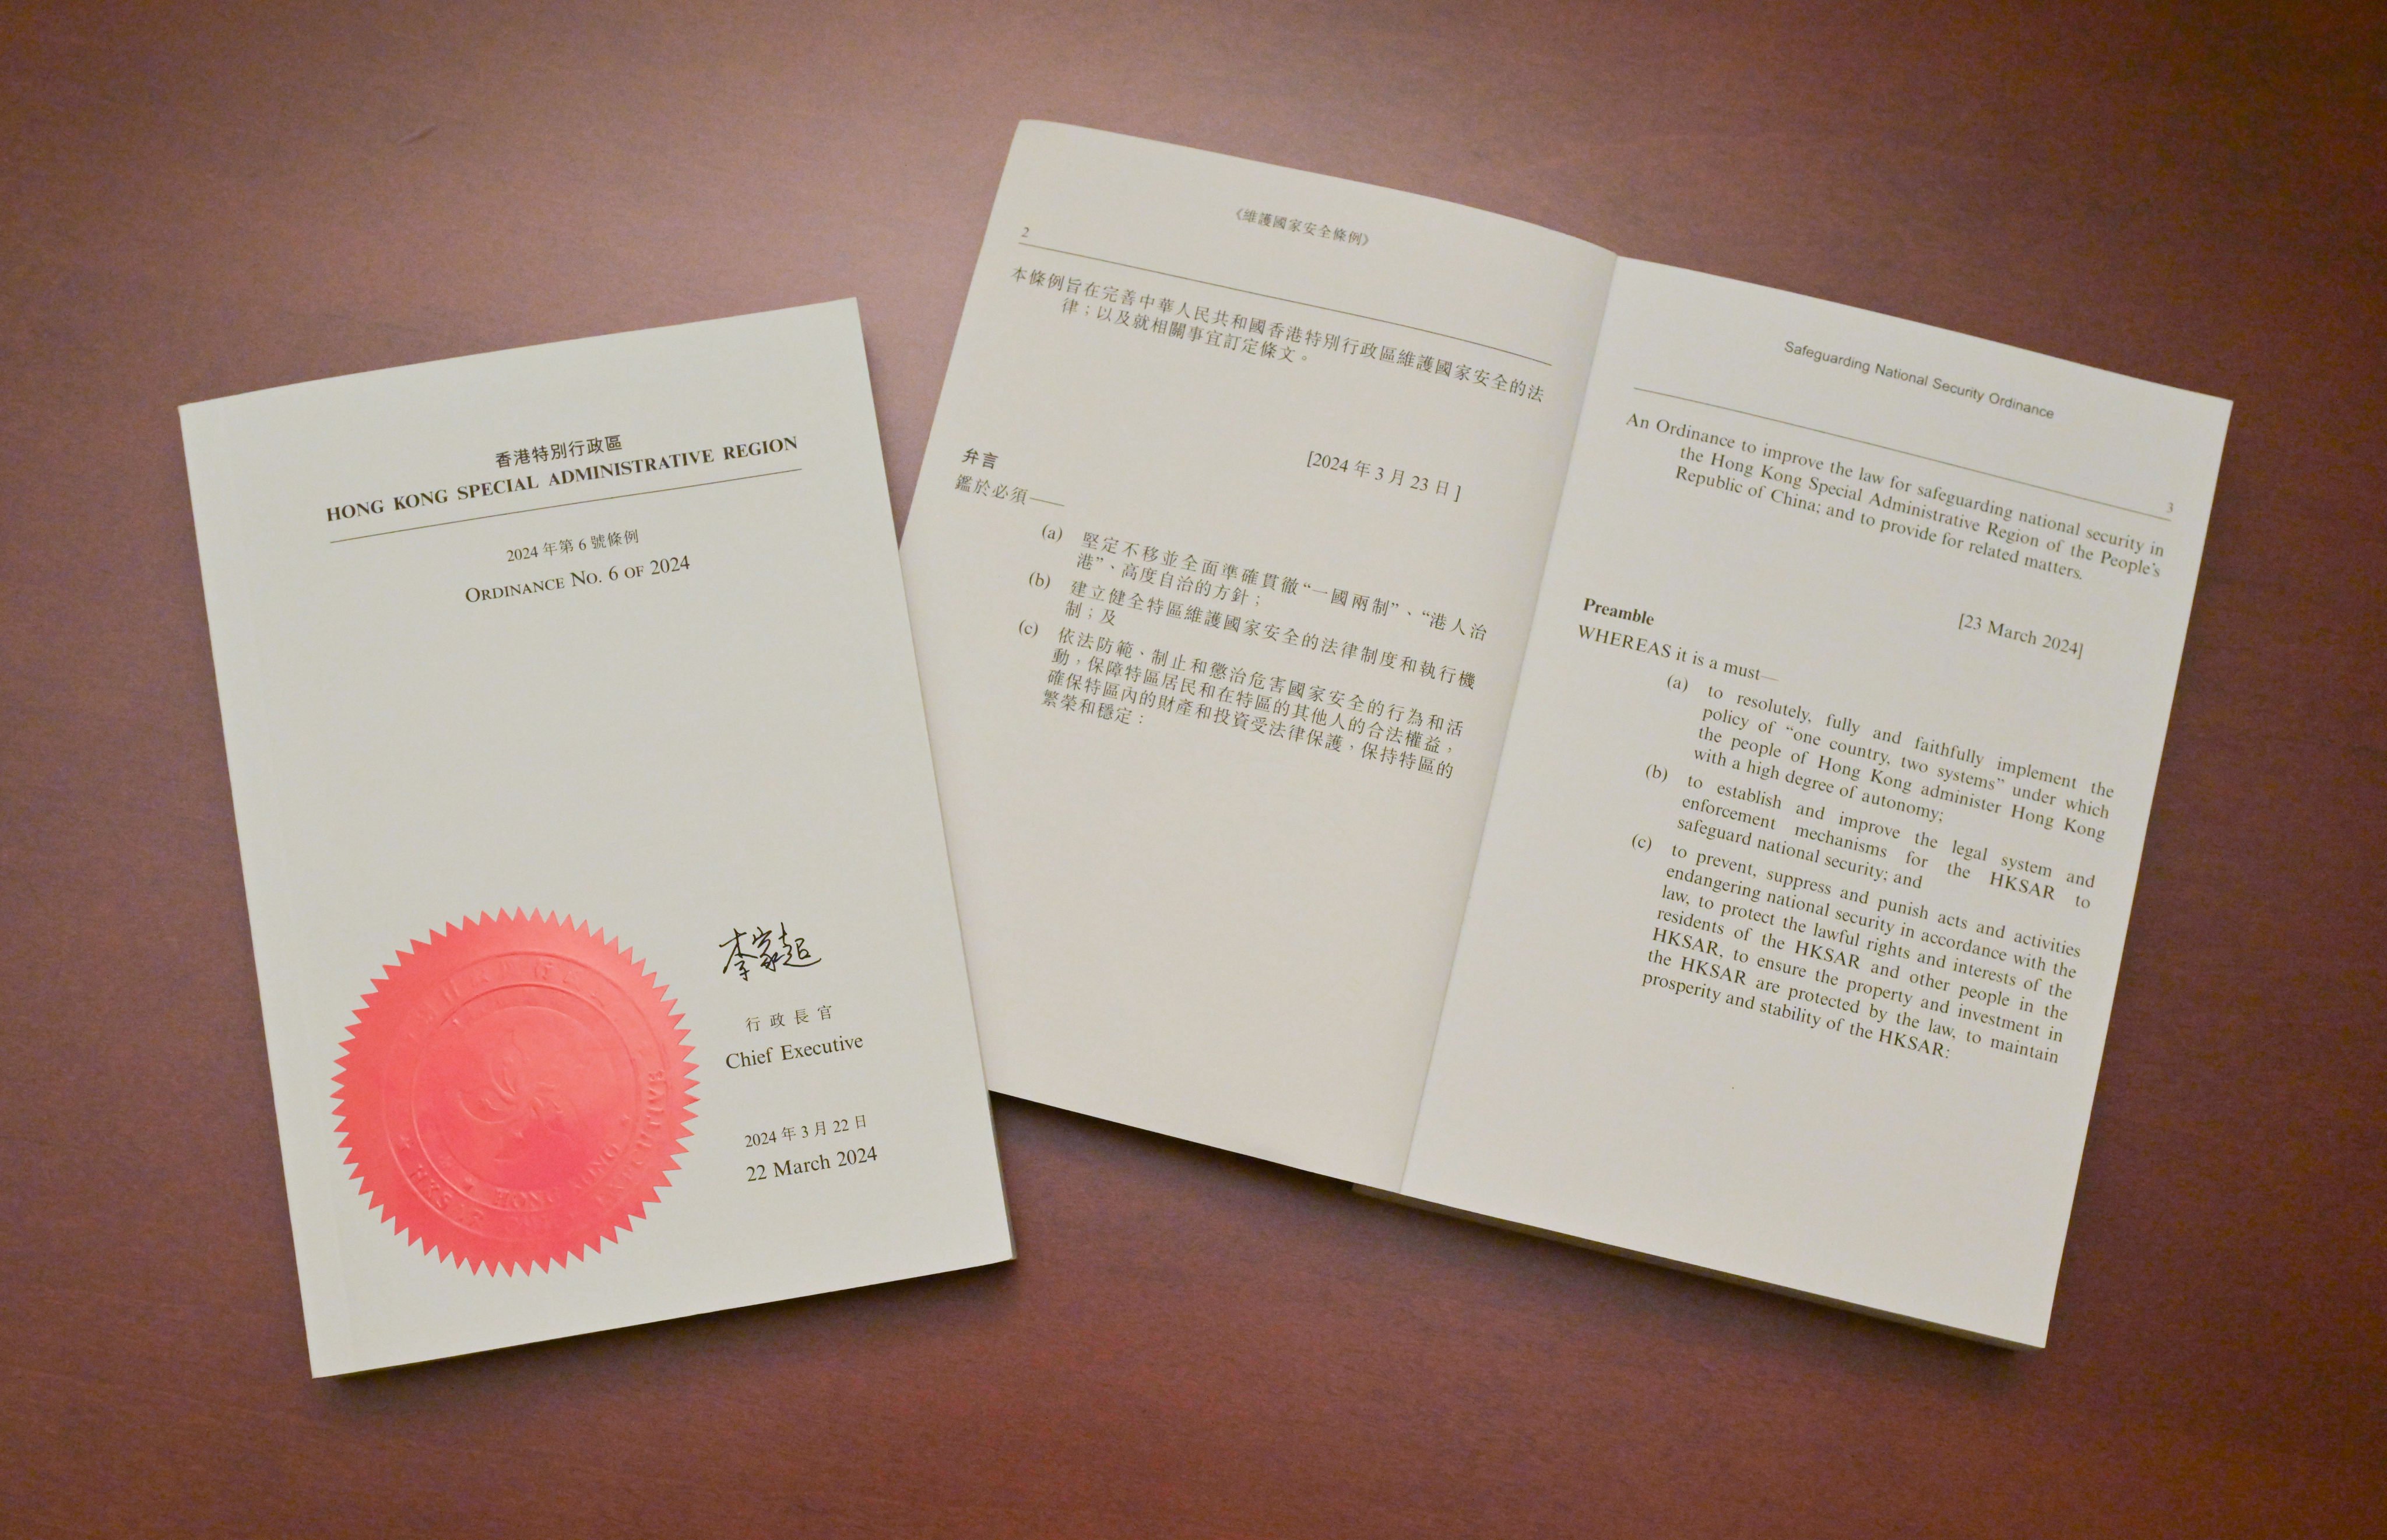 In addition to calling for the release of those detained under the national security law, the European Parliament resolution also condemned Hong Kong’s Article 23, the Safeguarding National Security Ordinance. Photo: ISD